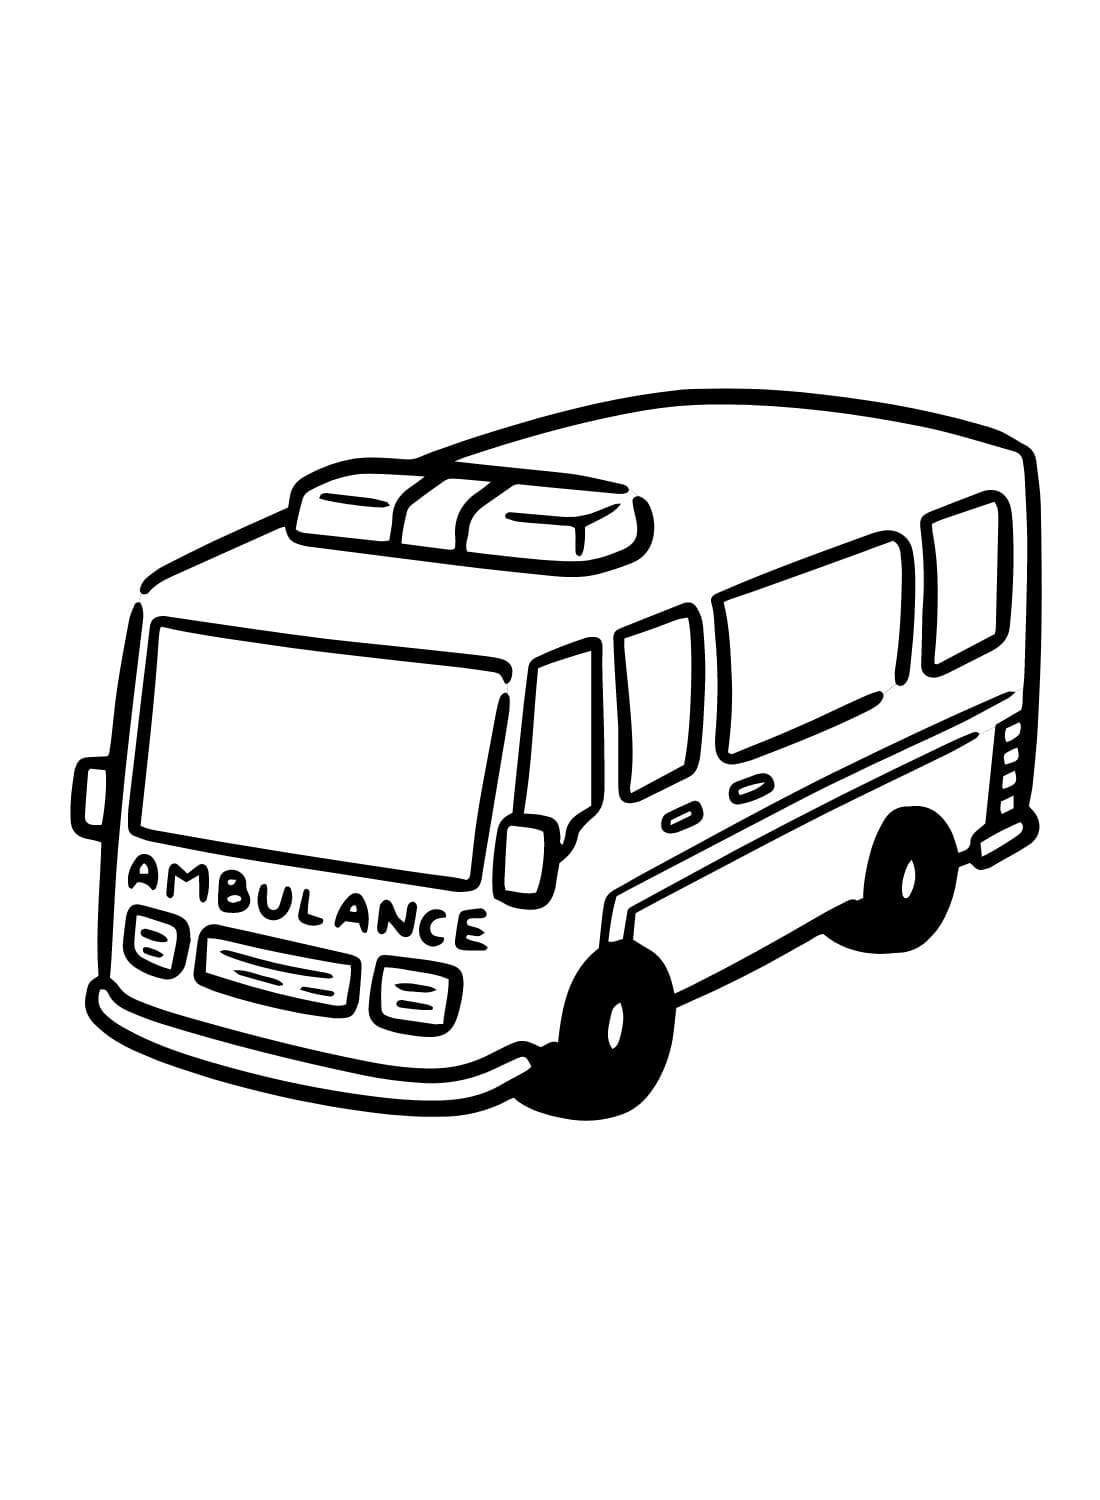 Ambulance Image coloring page - Download, Print or Color Online for Free